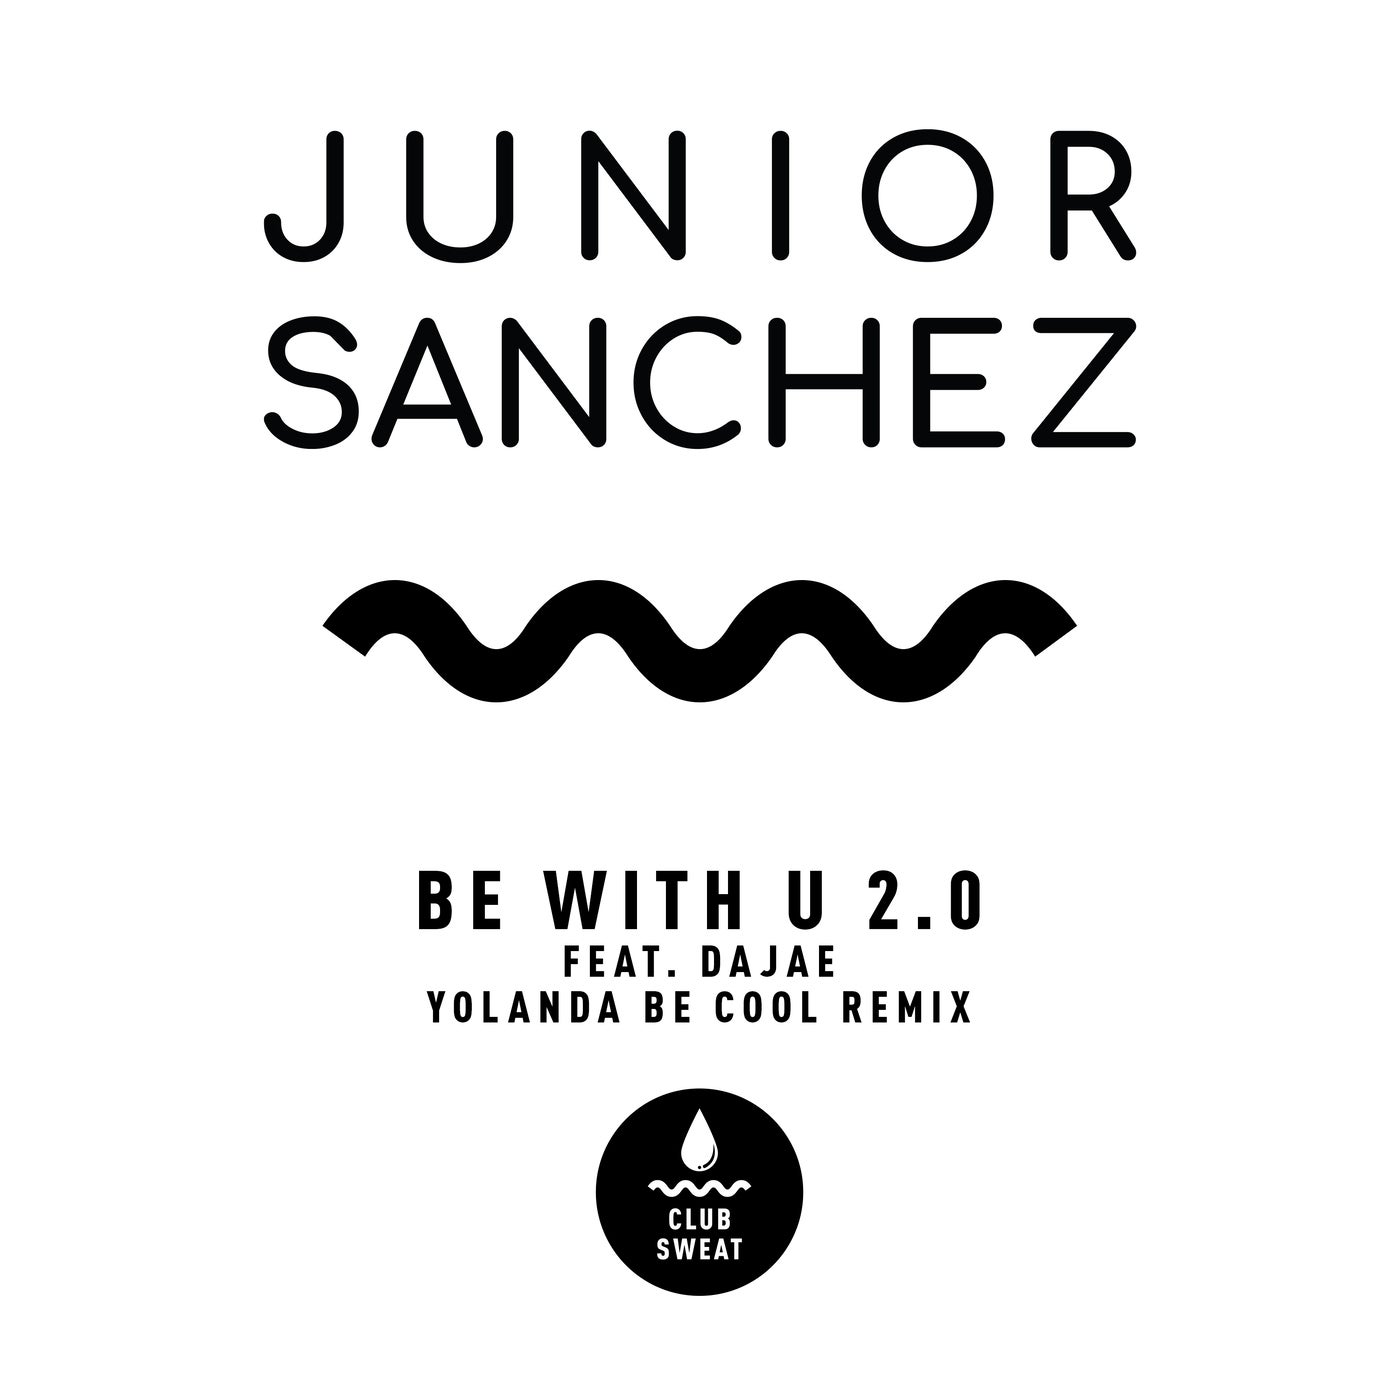 image cover: Junior Sanchez - Be with U 2.0 (feat. Dajae) [Yolanda Be Cool Extended Remix] / CLUBSWE376